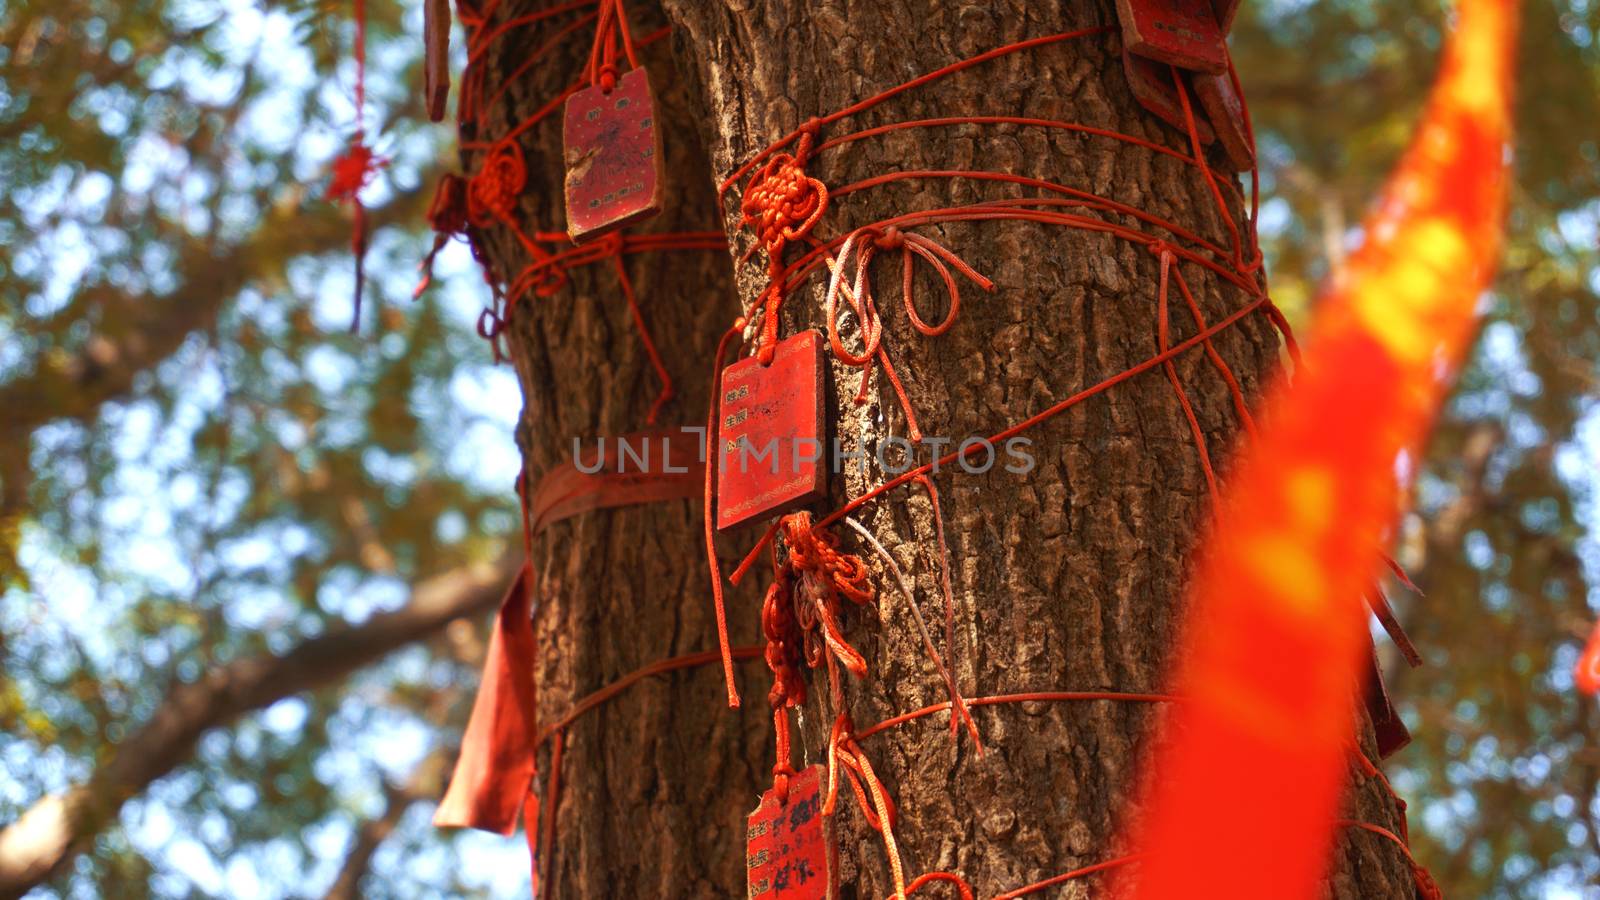 eople write and hang Ema Wood tag or Wooden label for praying for good luck happy other at Sanya, China